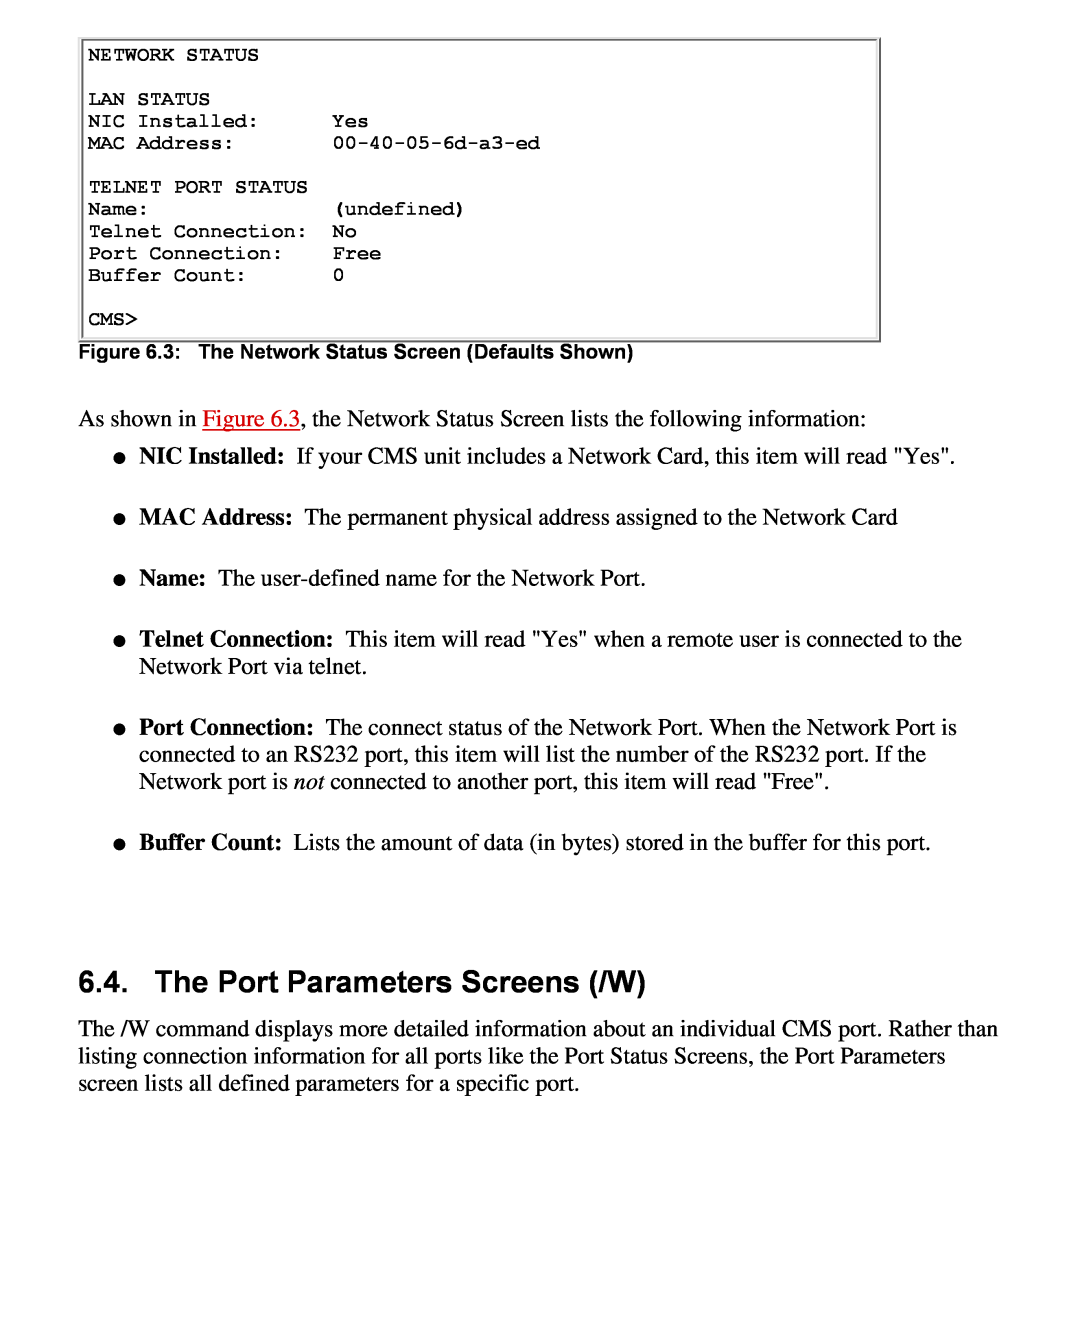 Western Telematic CMS-16 manual The Port Parameters Screens /W, 3 The Network Status Screen Defaults Shown 